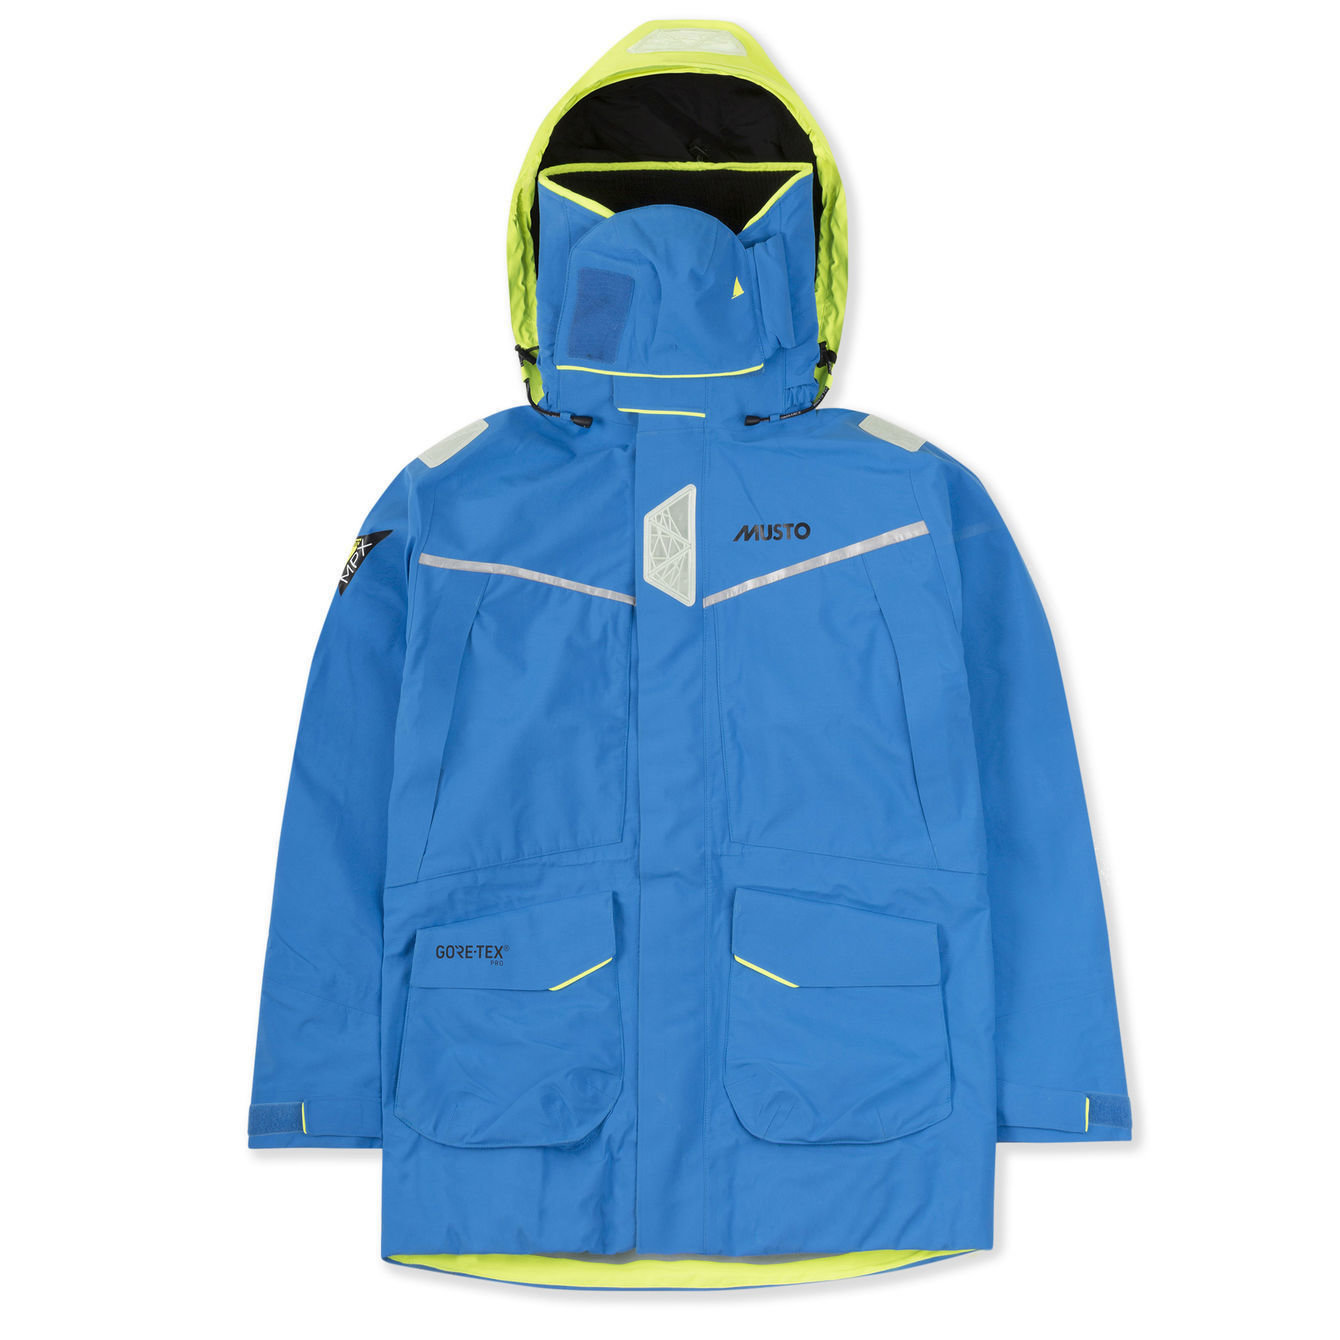 Jacket Musto MPX Gore-Tex Pro Offshore Jacket Brilliant Blue MB